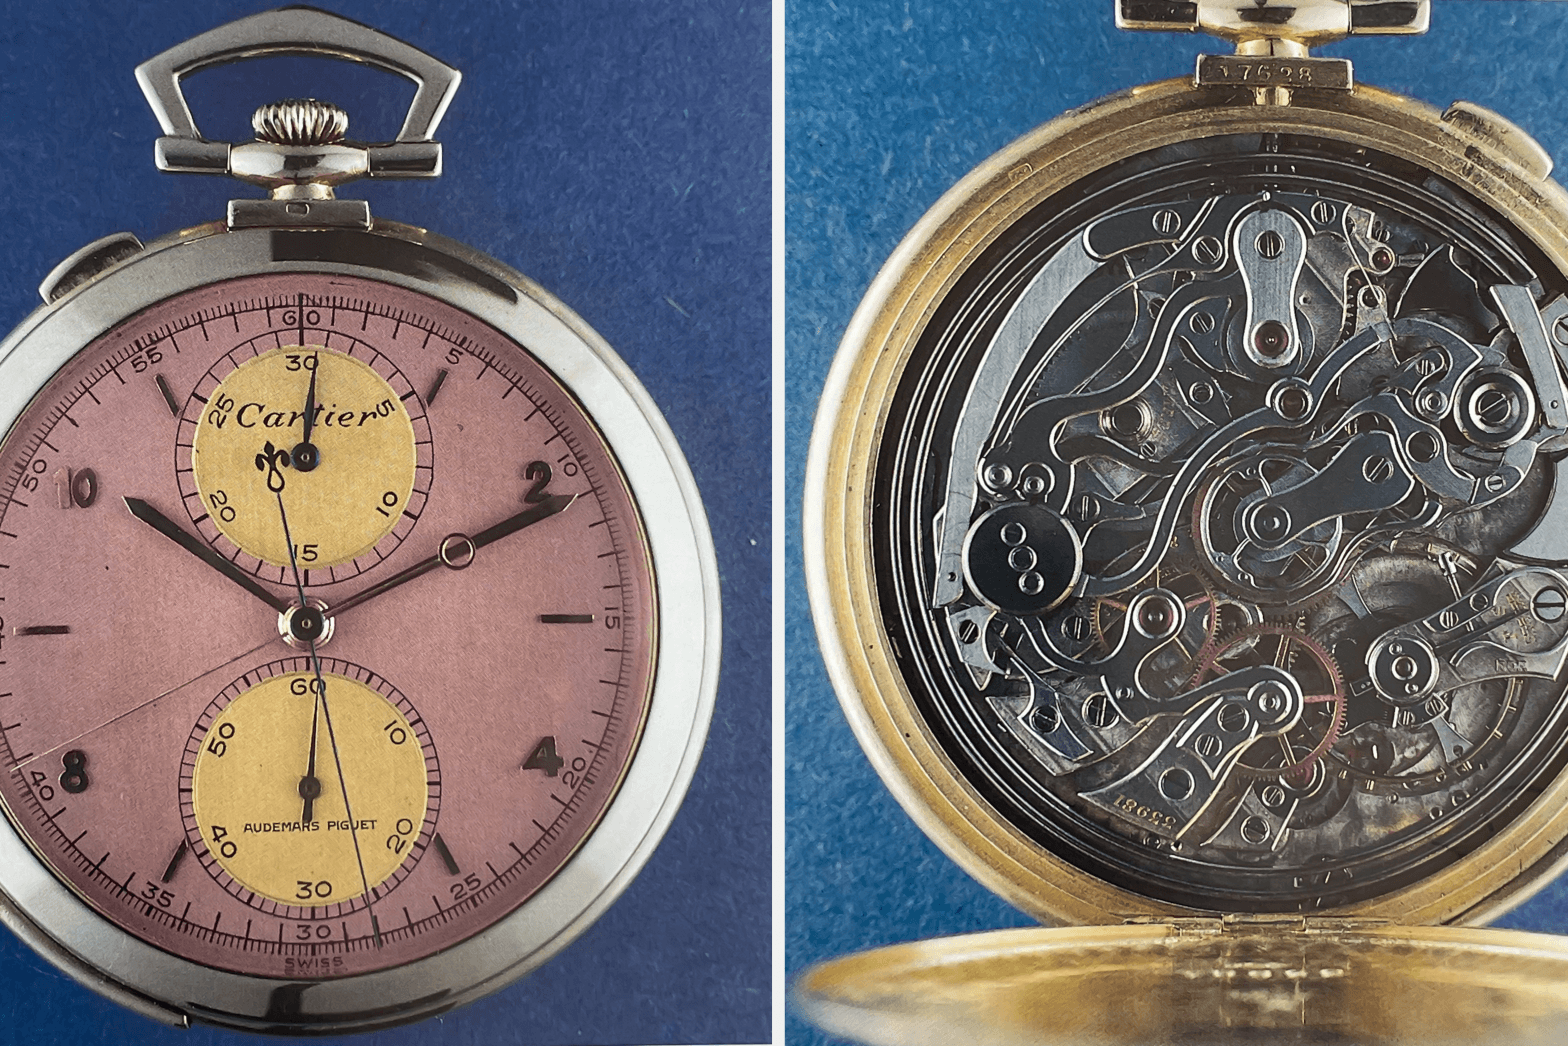 Gold Lepine chronograph with split-seconds, minute repeater and 30 minute  counter made for Cartier, 1925, Photo Copyright Audemars Piguet; Masterpieces of Classical  Watchmaking, Brunner, Pfeiffer-Belli and Wehrli, 1993